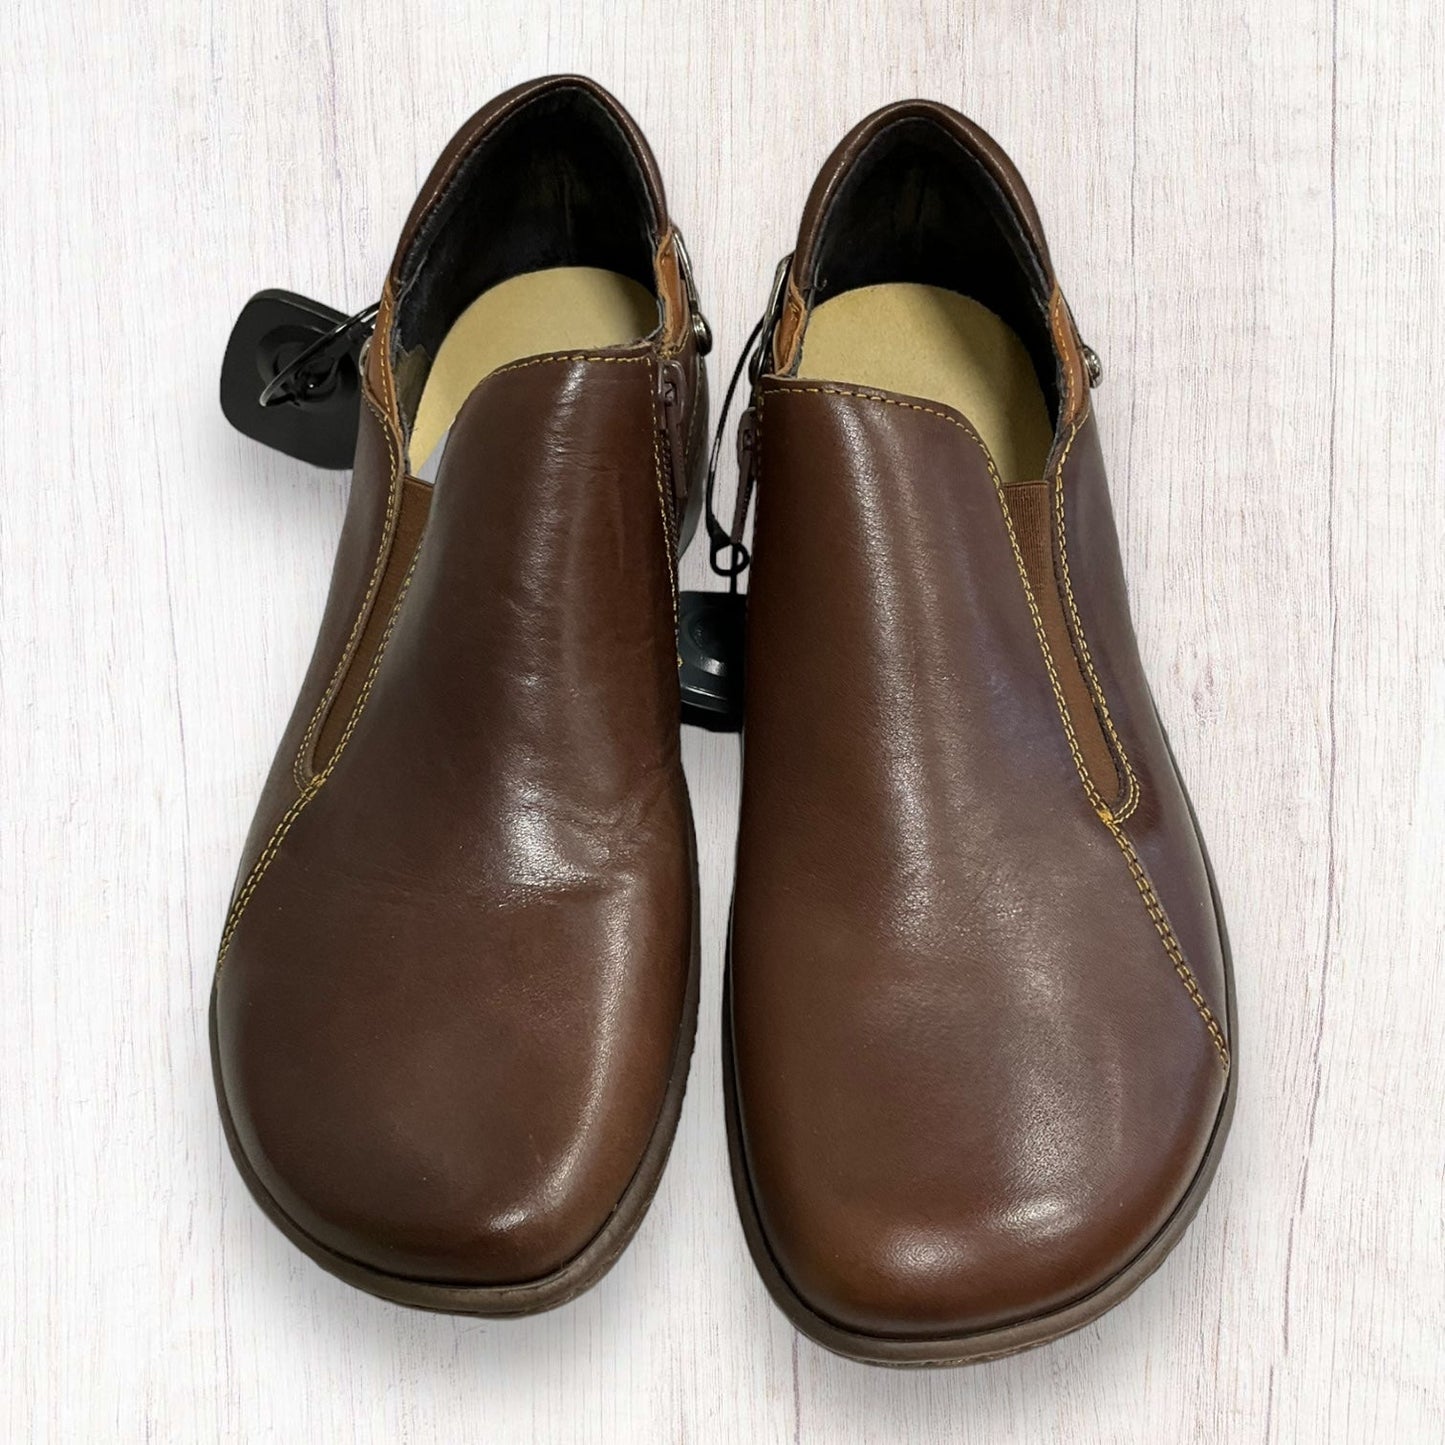 Brown Shoes Flats Naot, Size 8.5